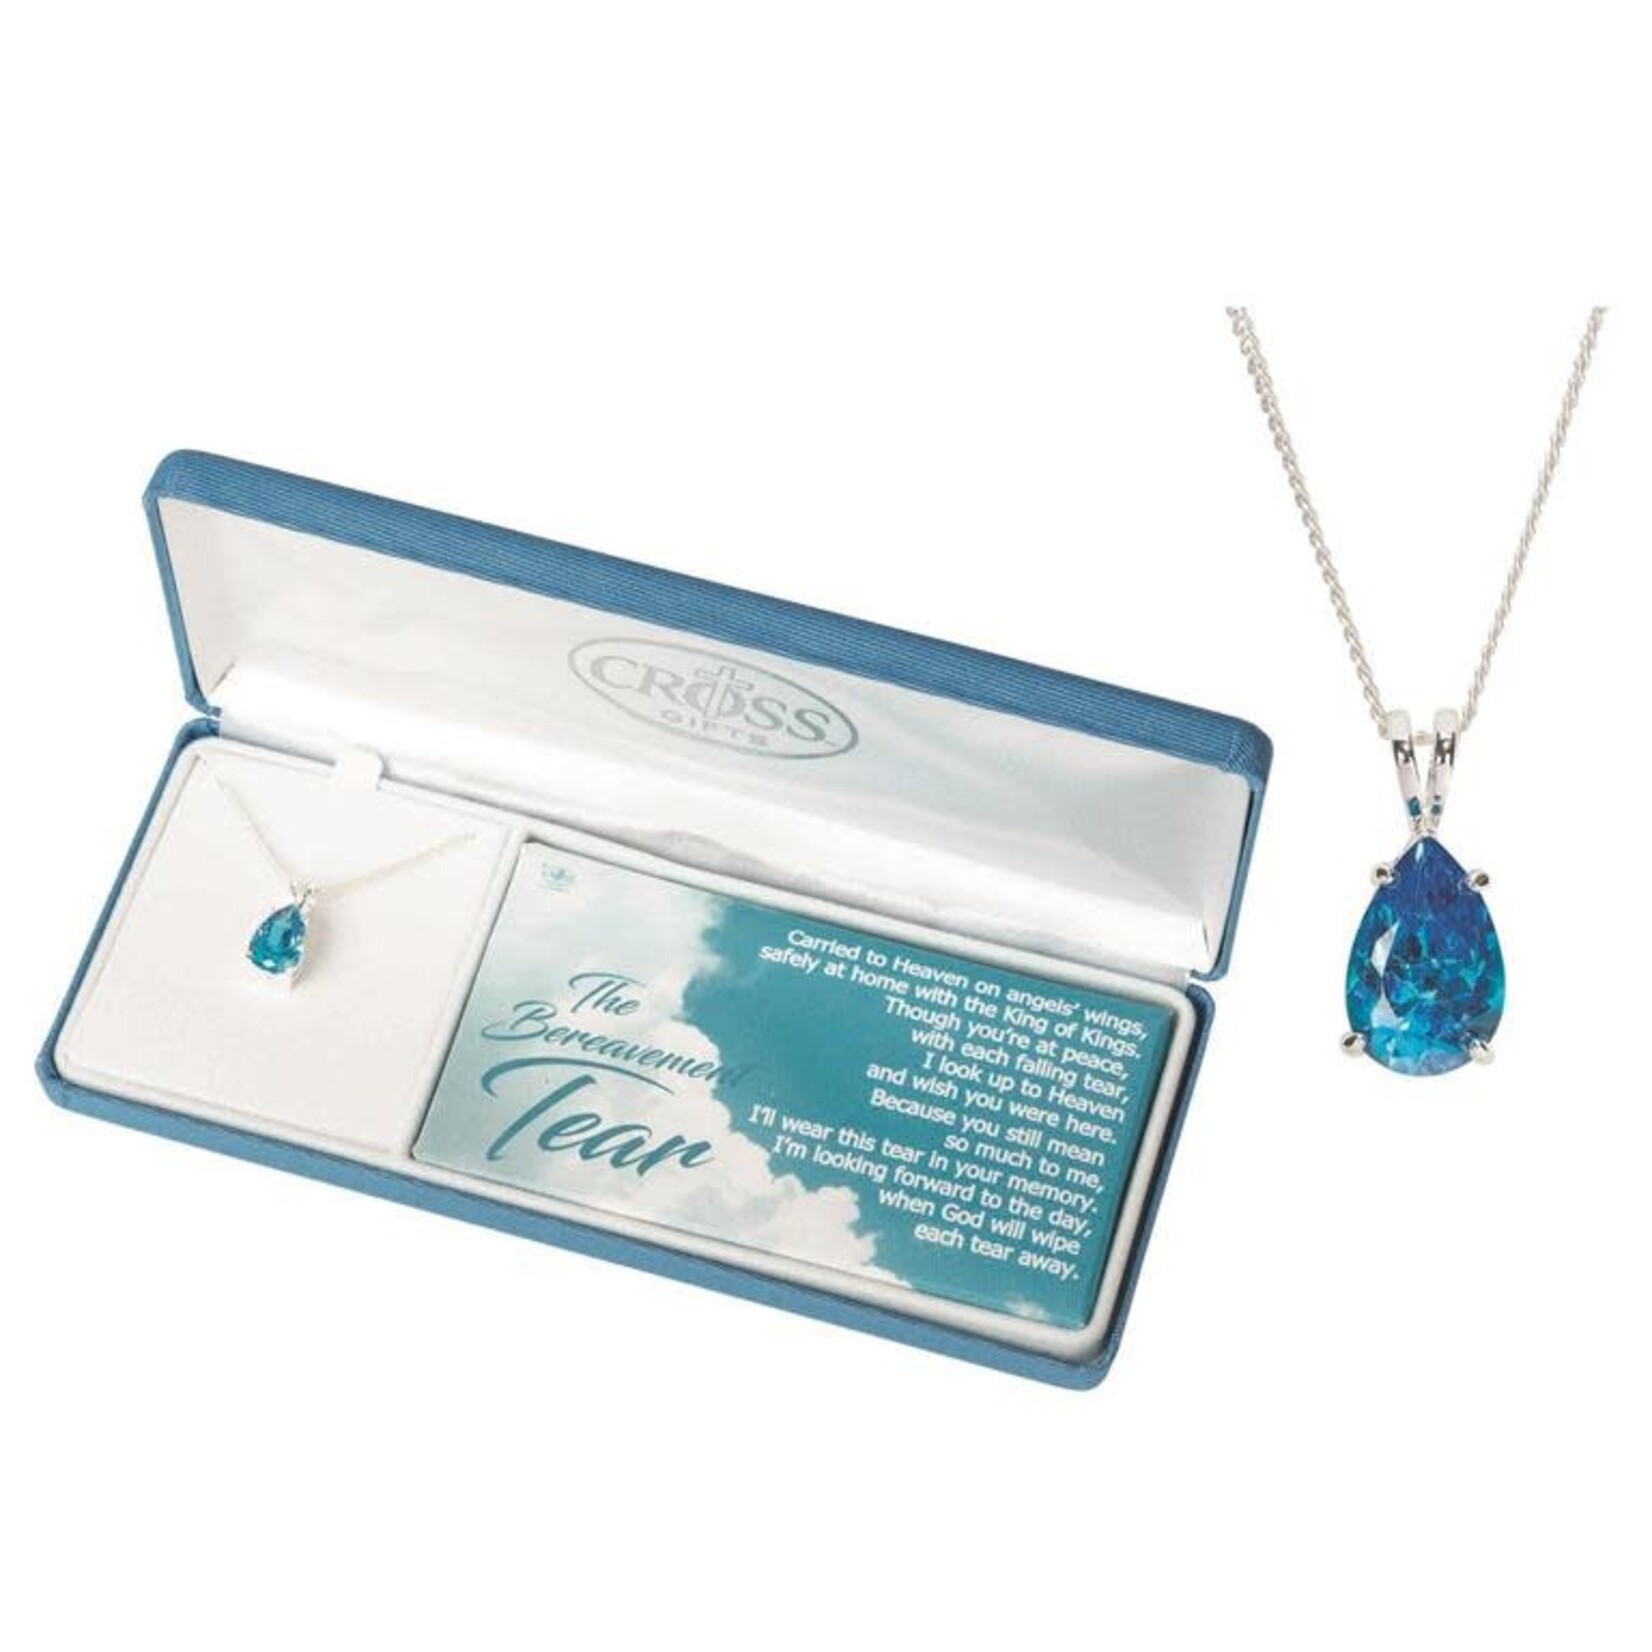 Dicksons The Bereavement Tear Necklace